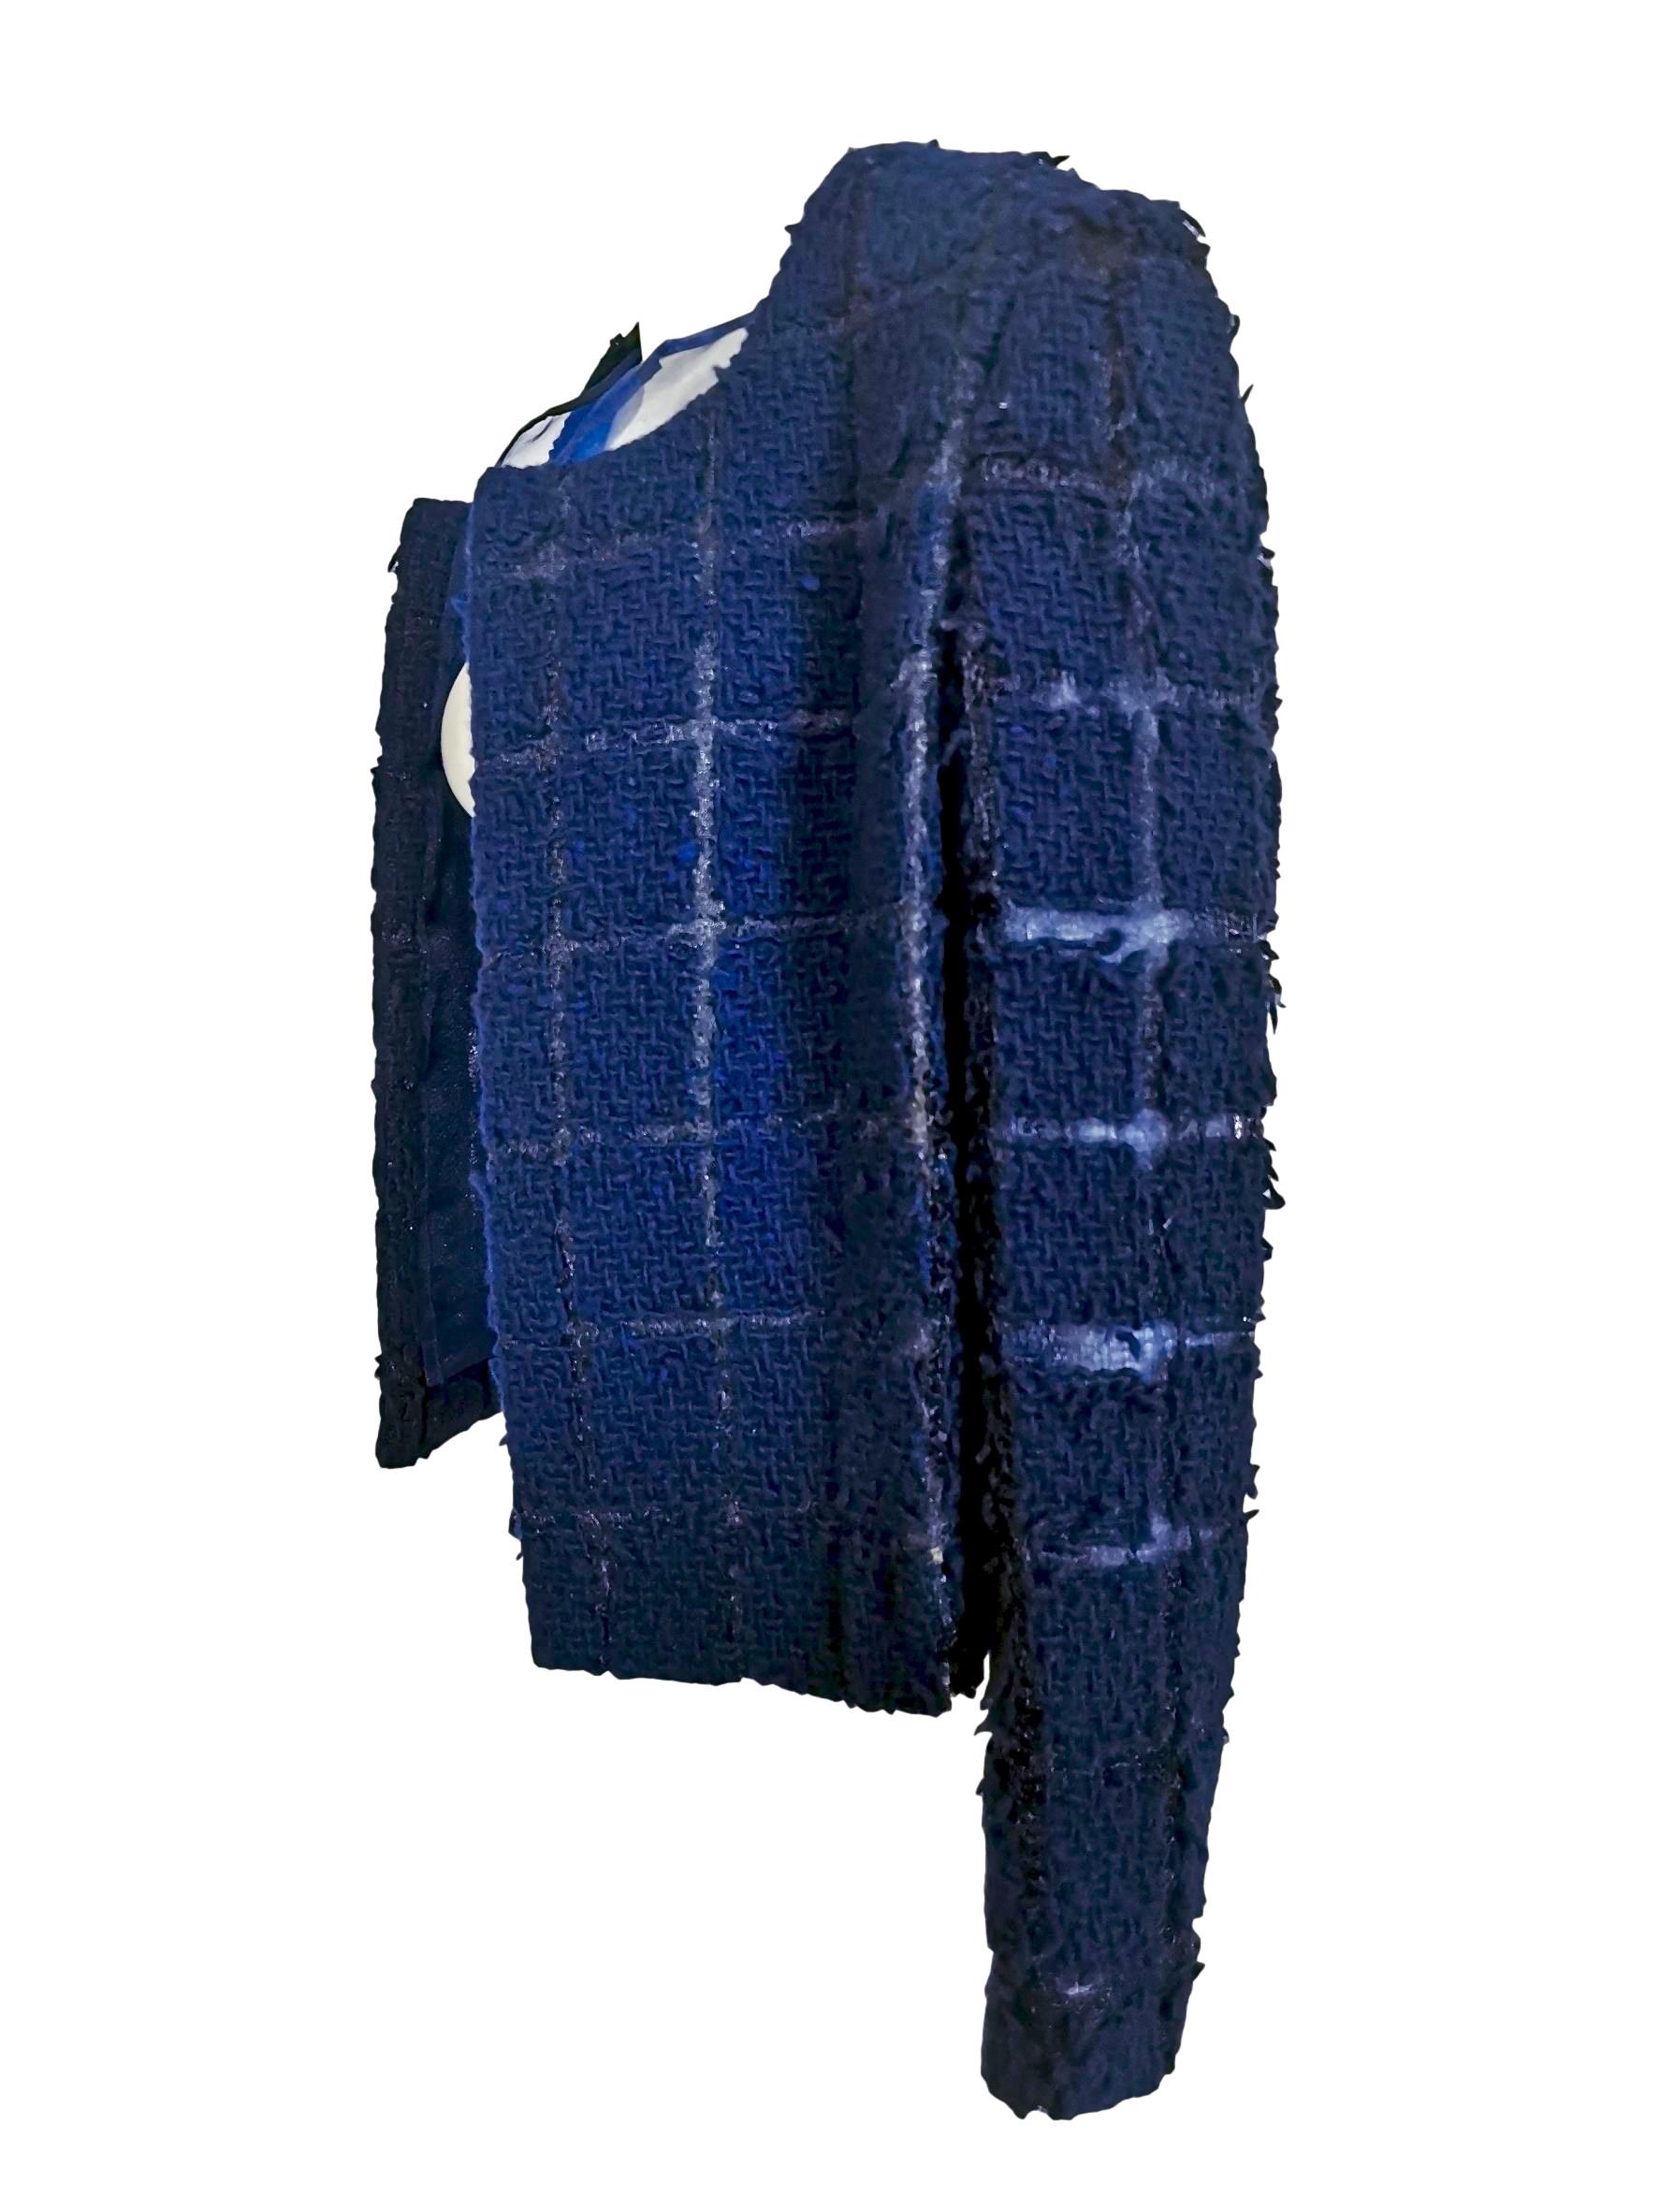 Comme des Garcons 1997 Organza Lined Wool Dress and Jacket For Sale 8